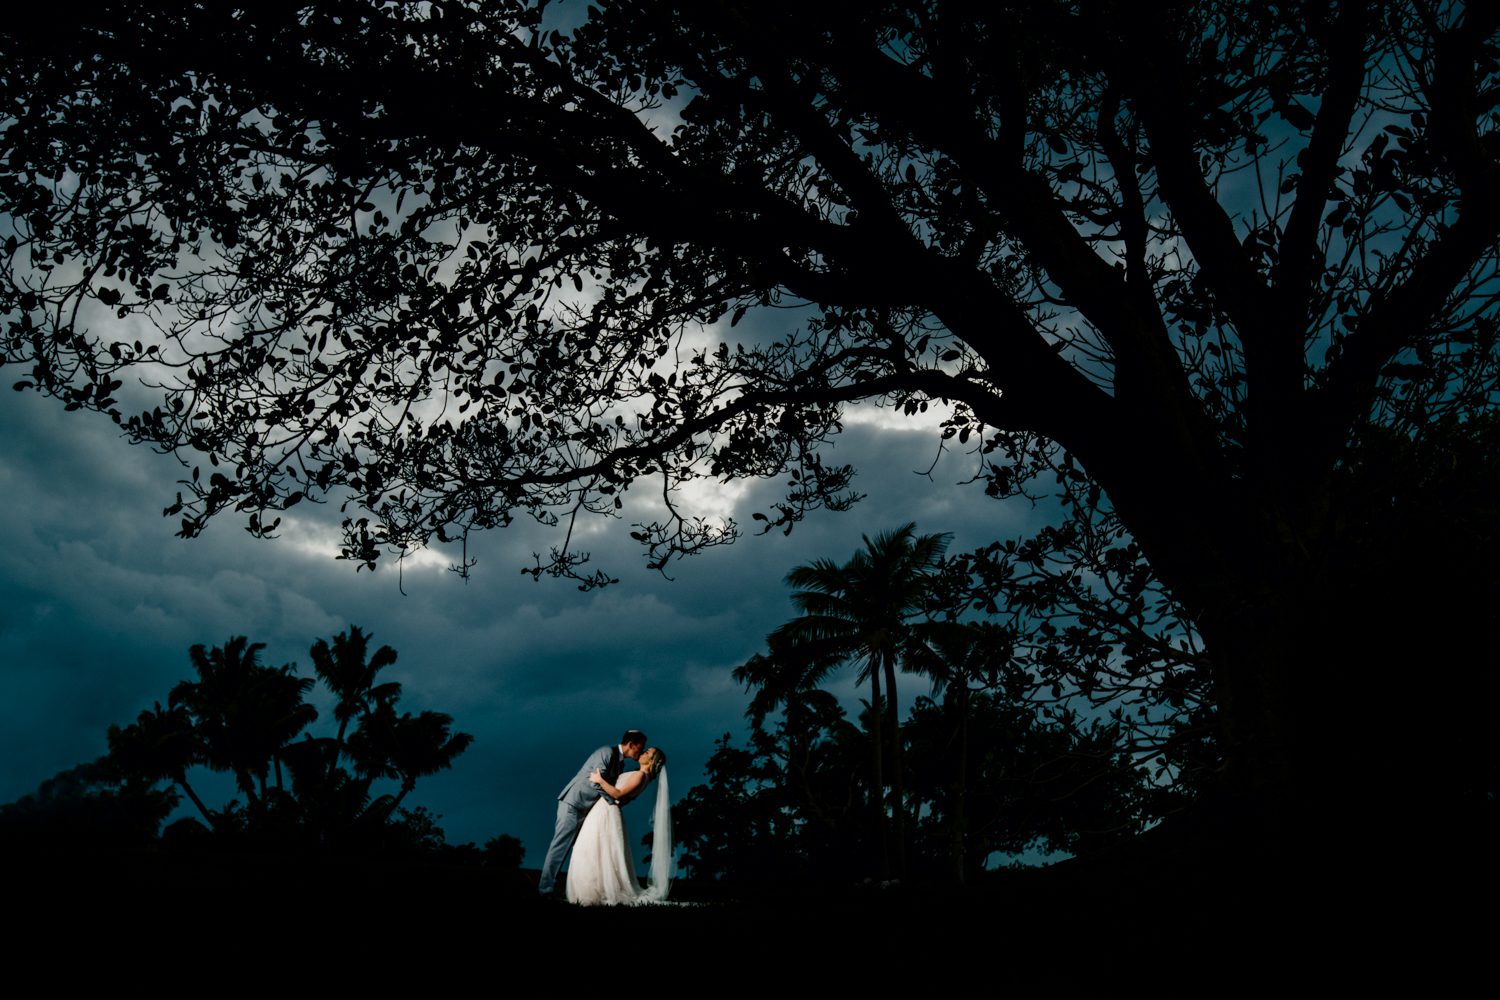 A bride and groom kiss under a tree during their stormy sky wedding.